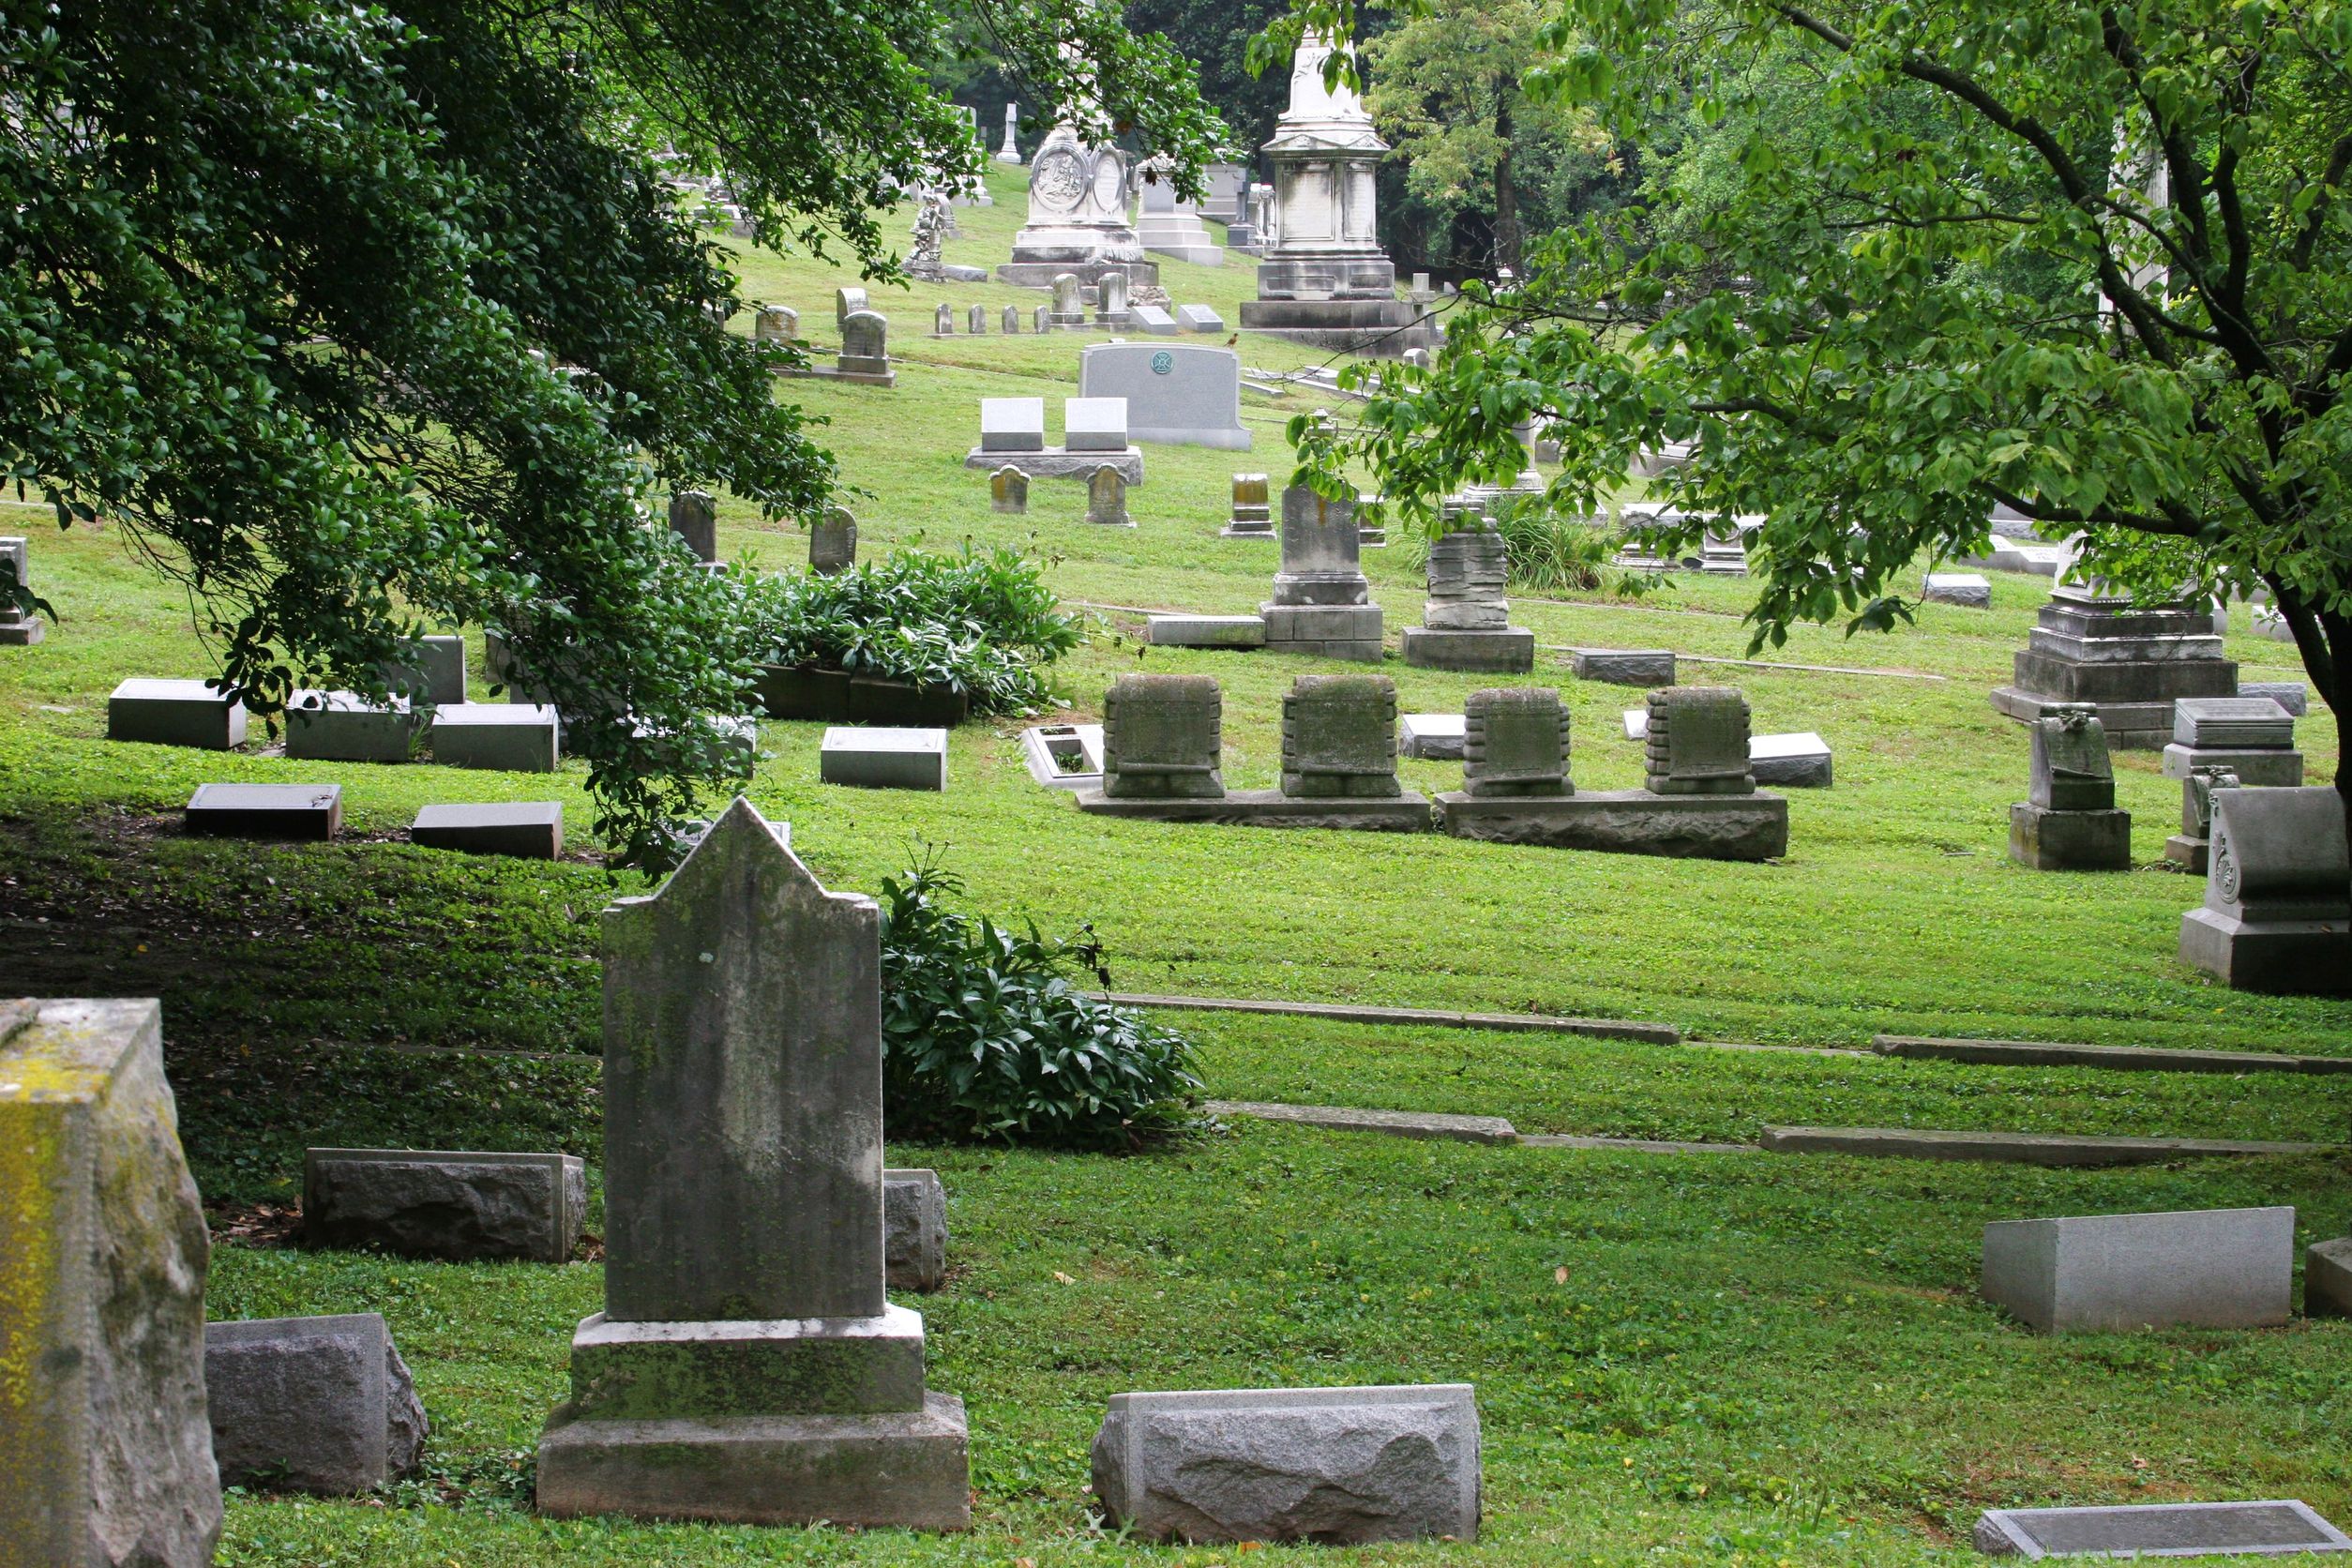 Our Lady of Hope Offers Cemetery Services in Brownstown